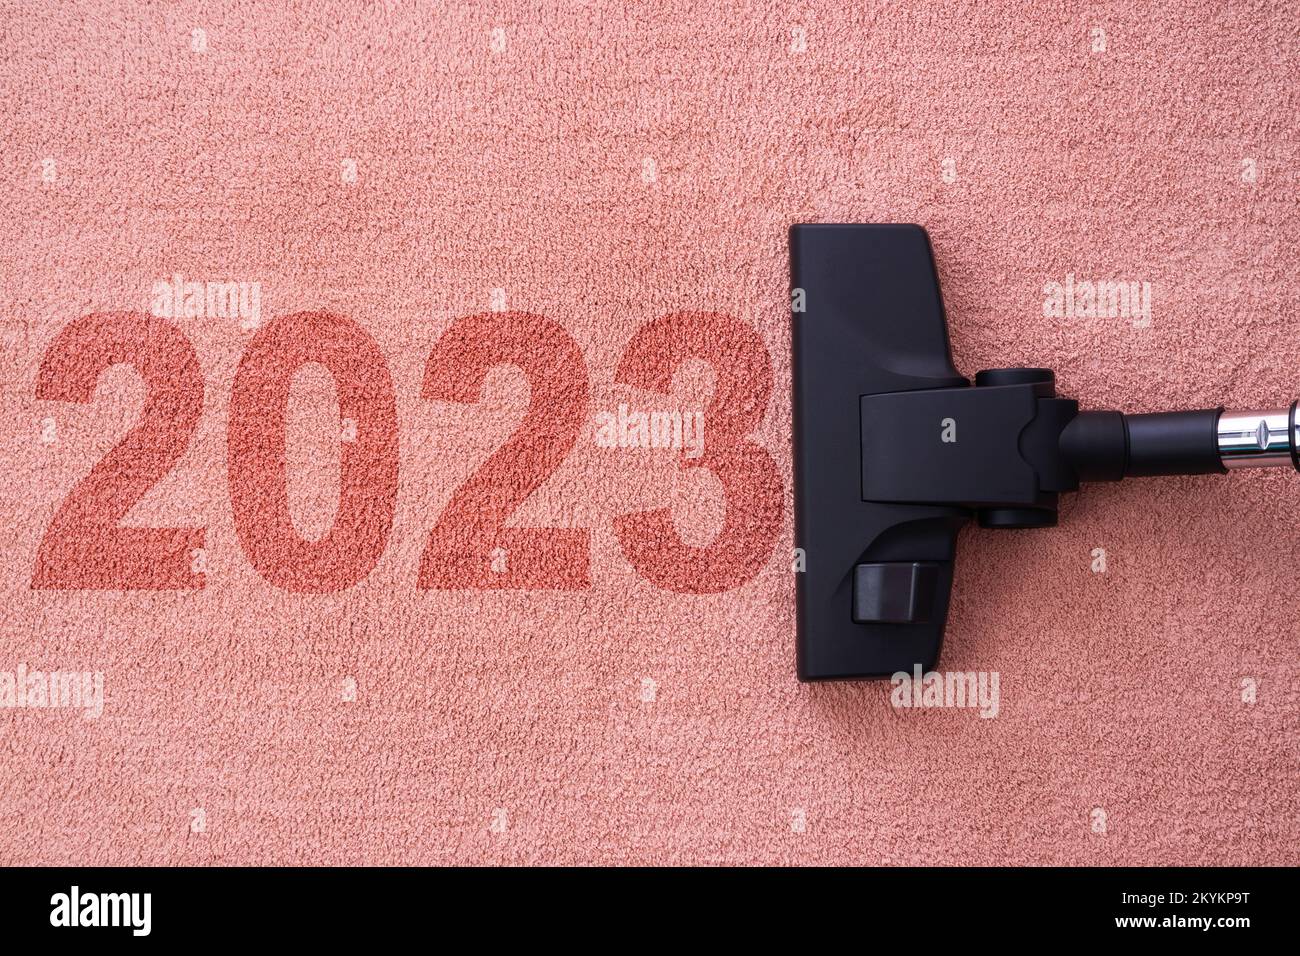 Refreshing in the New year 2023 concept for cleaning home cleaning with vacuum cleaner on carpet and copy space for a text Stock Photo